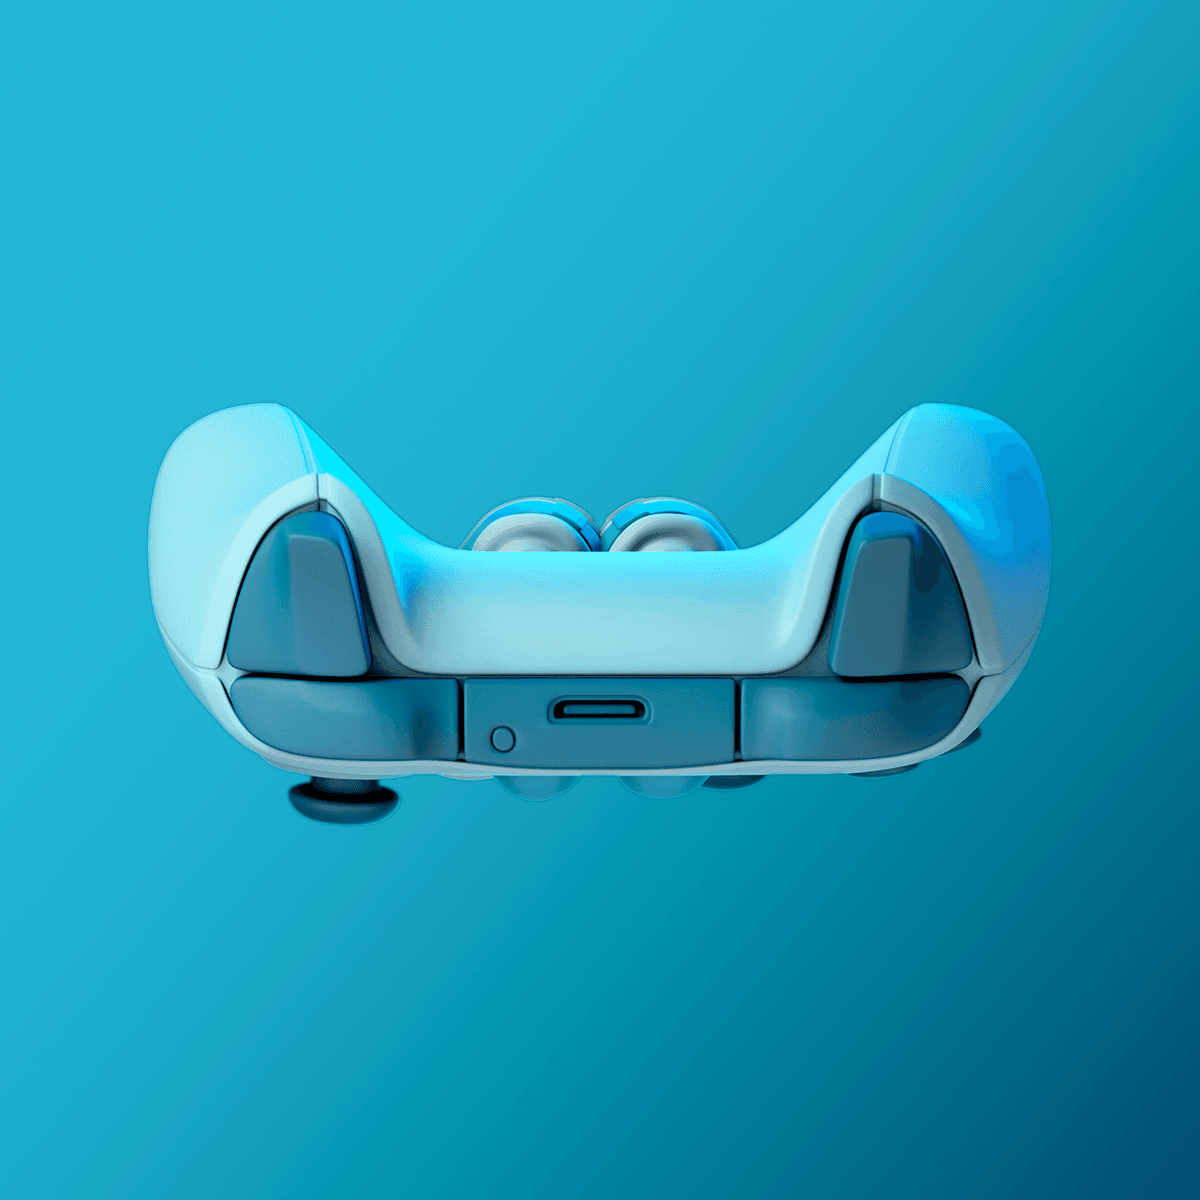 "Boxy" the Xbox Controller 3d model